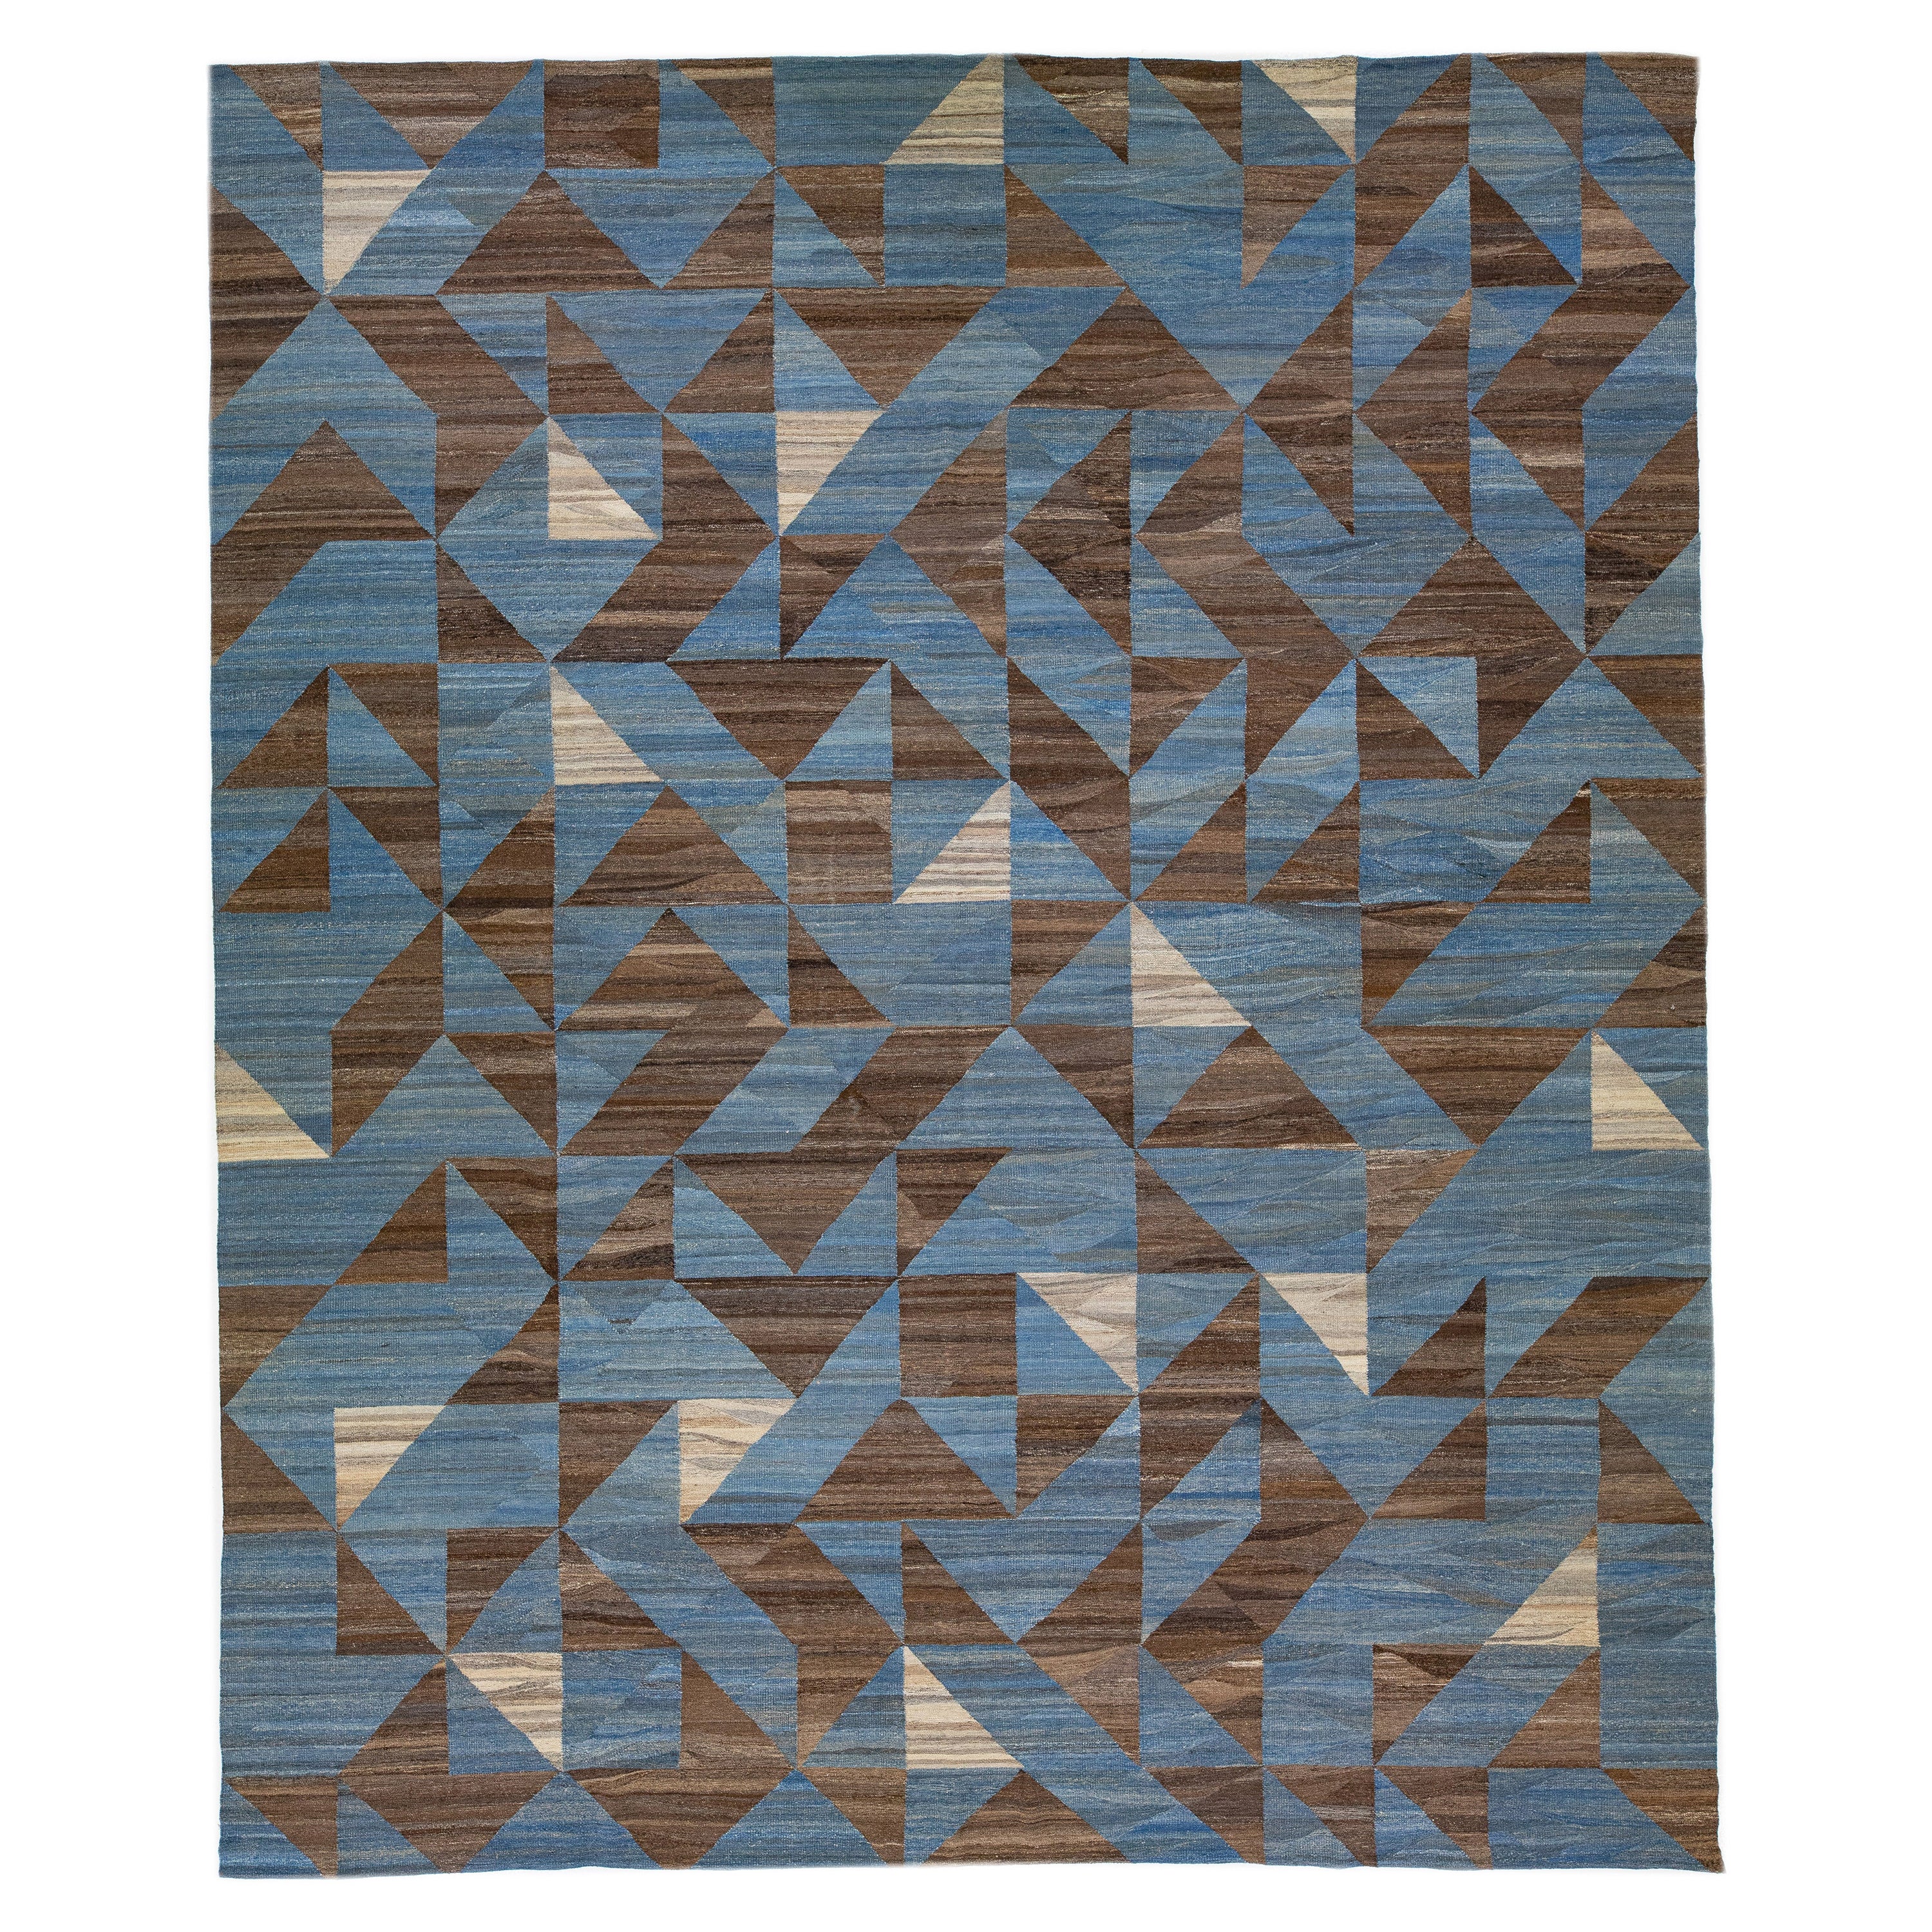 Blue Oversize Kilim Wool Rug Flatweave with a Modern Abstract Design